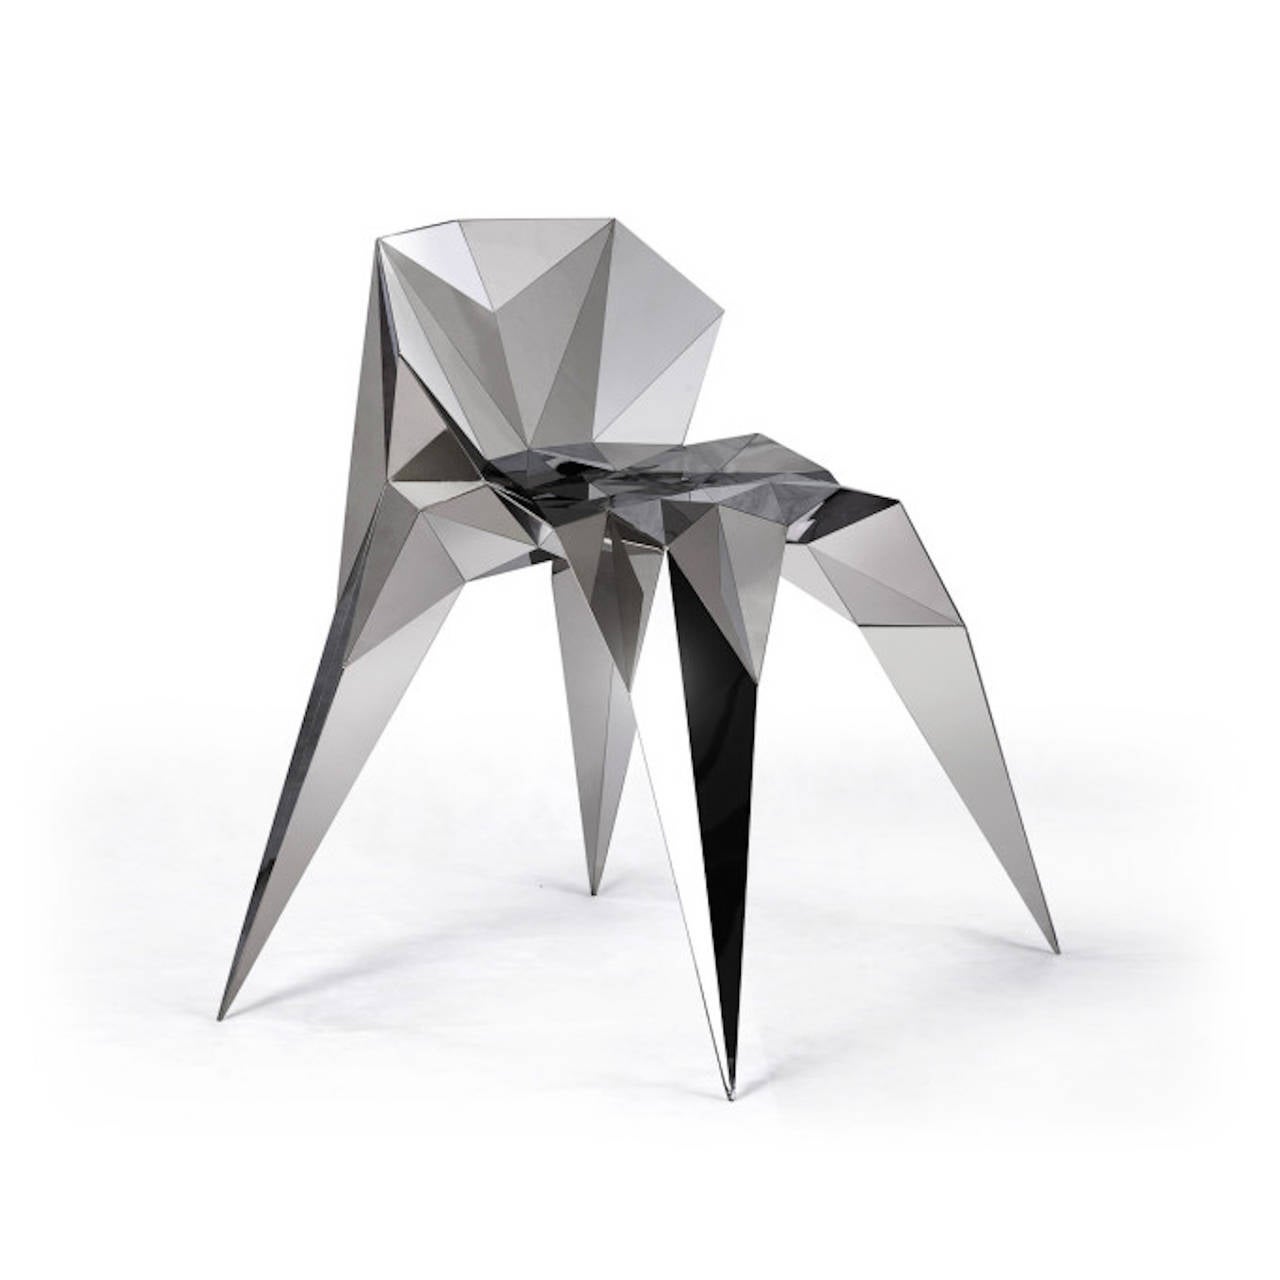 The Bow Tie Chair is a perfect example of Zhoujie’s philosophy of Actionless. Like a force of an airplane, polymerizing inward and flowing with natural tendency. The digital generation process only took a few seconds, but the continuous logical